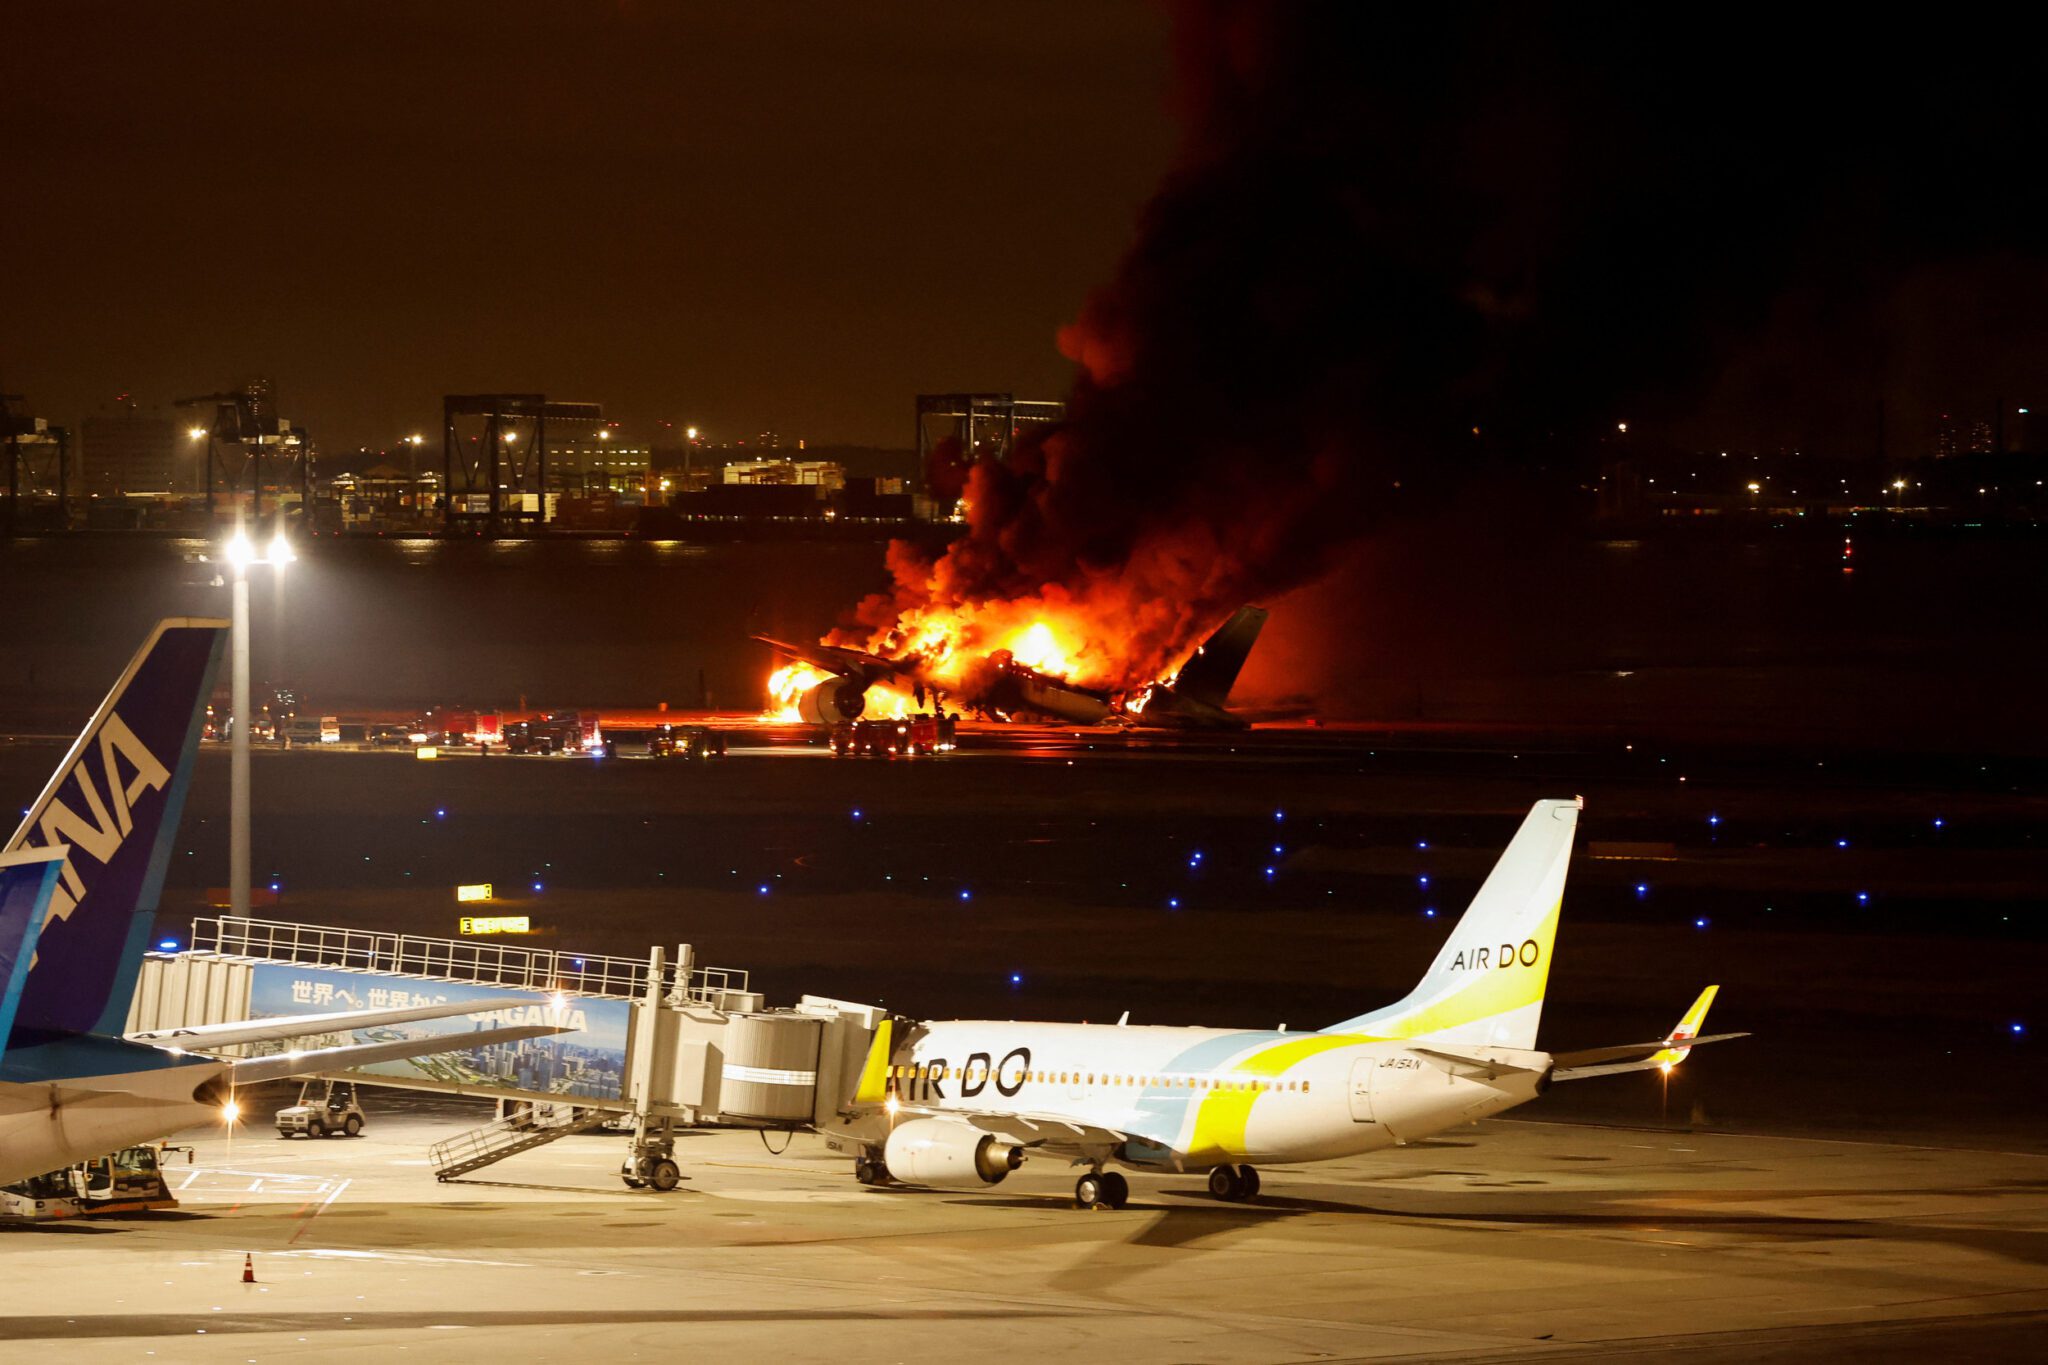 A Japan Airlines plane burns on the runway at Tokyo's Haneda Airport.